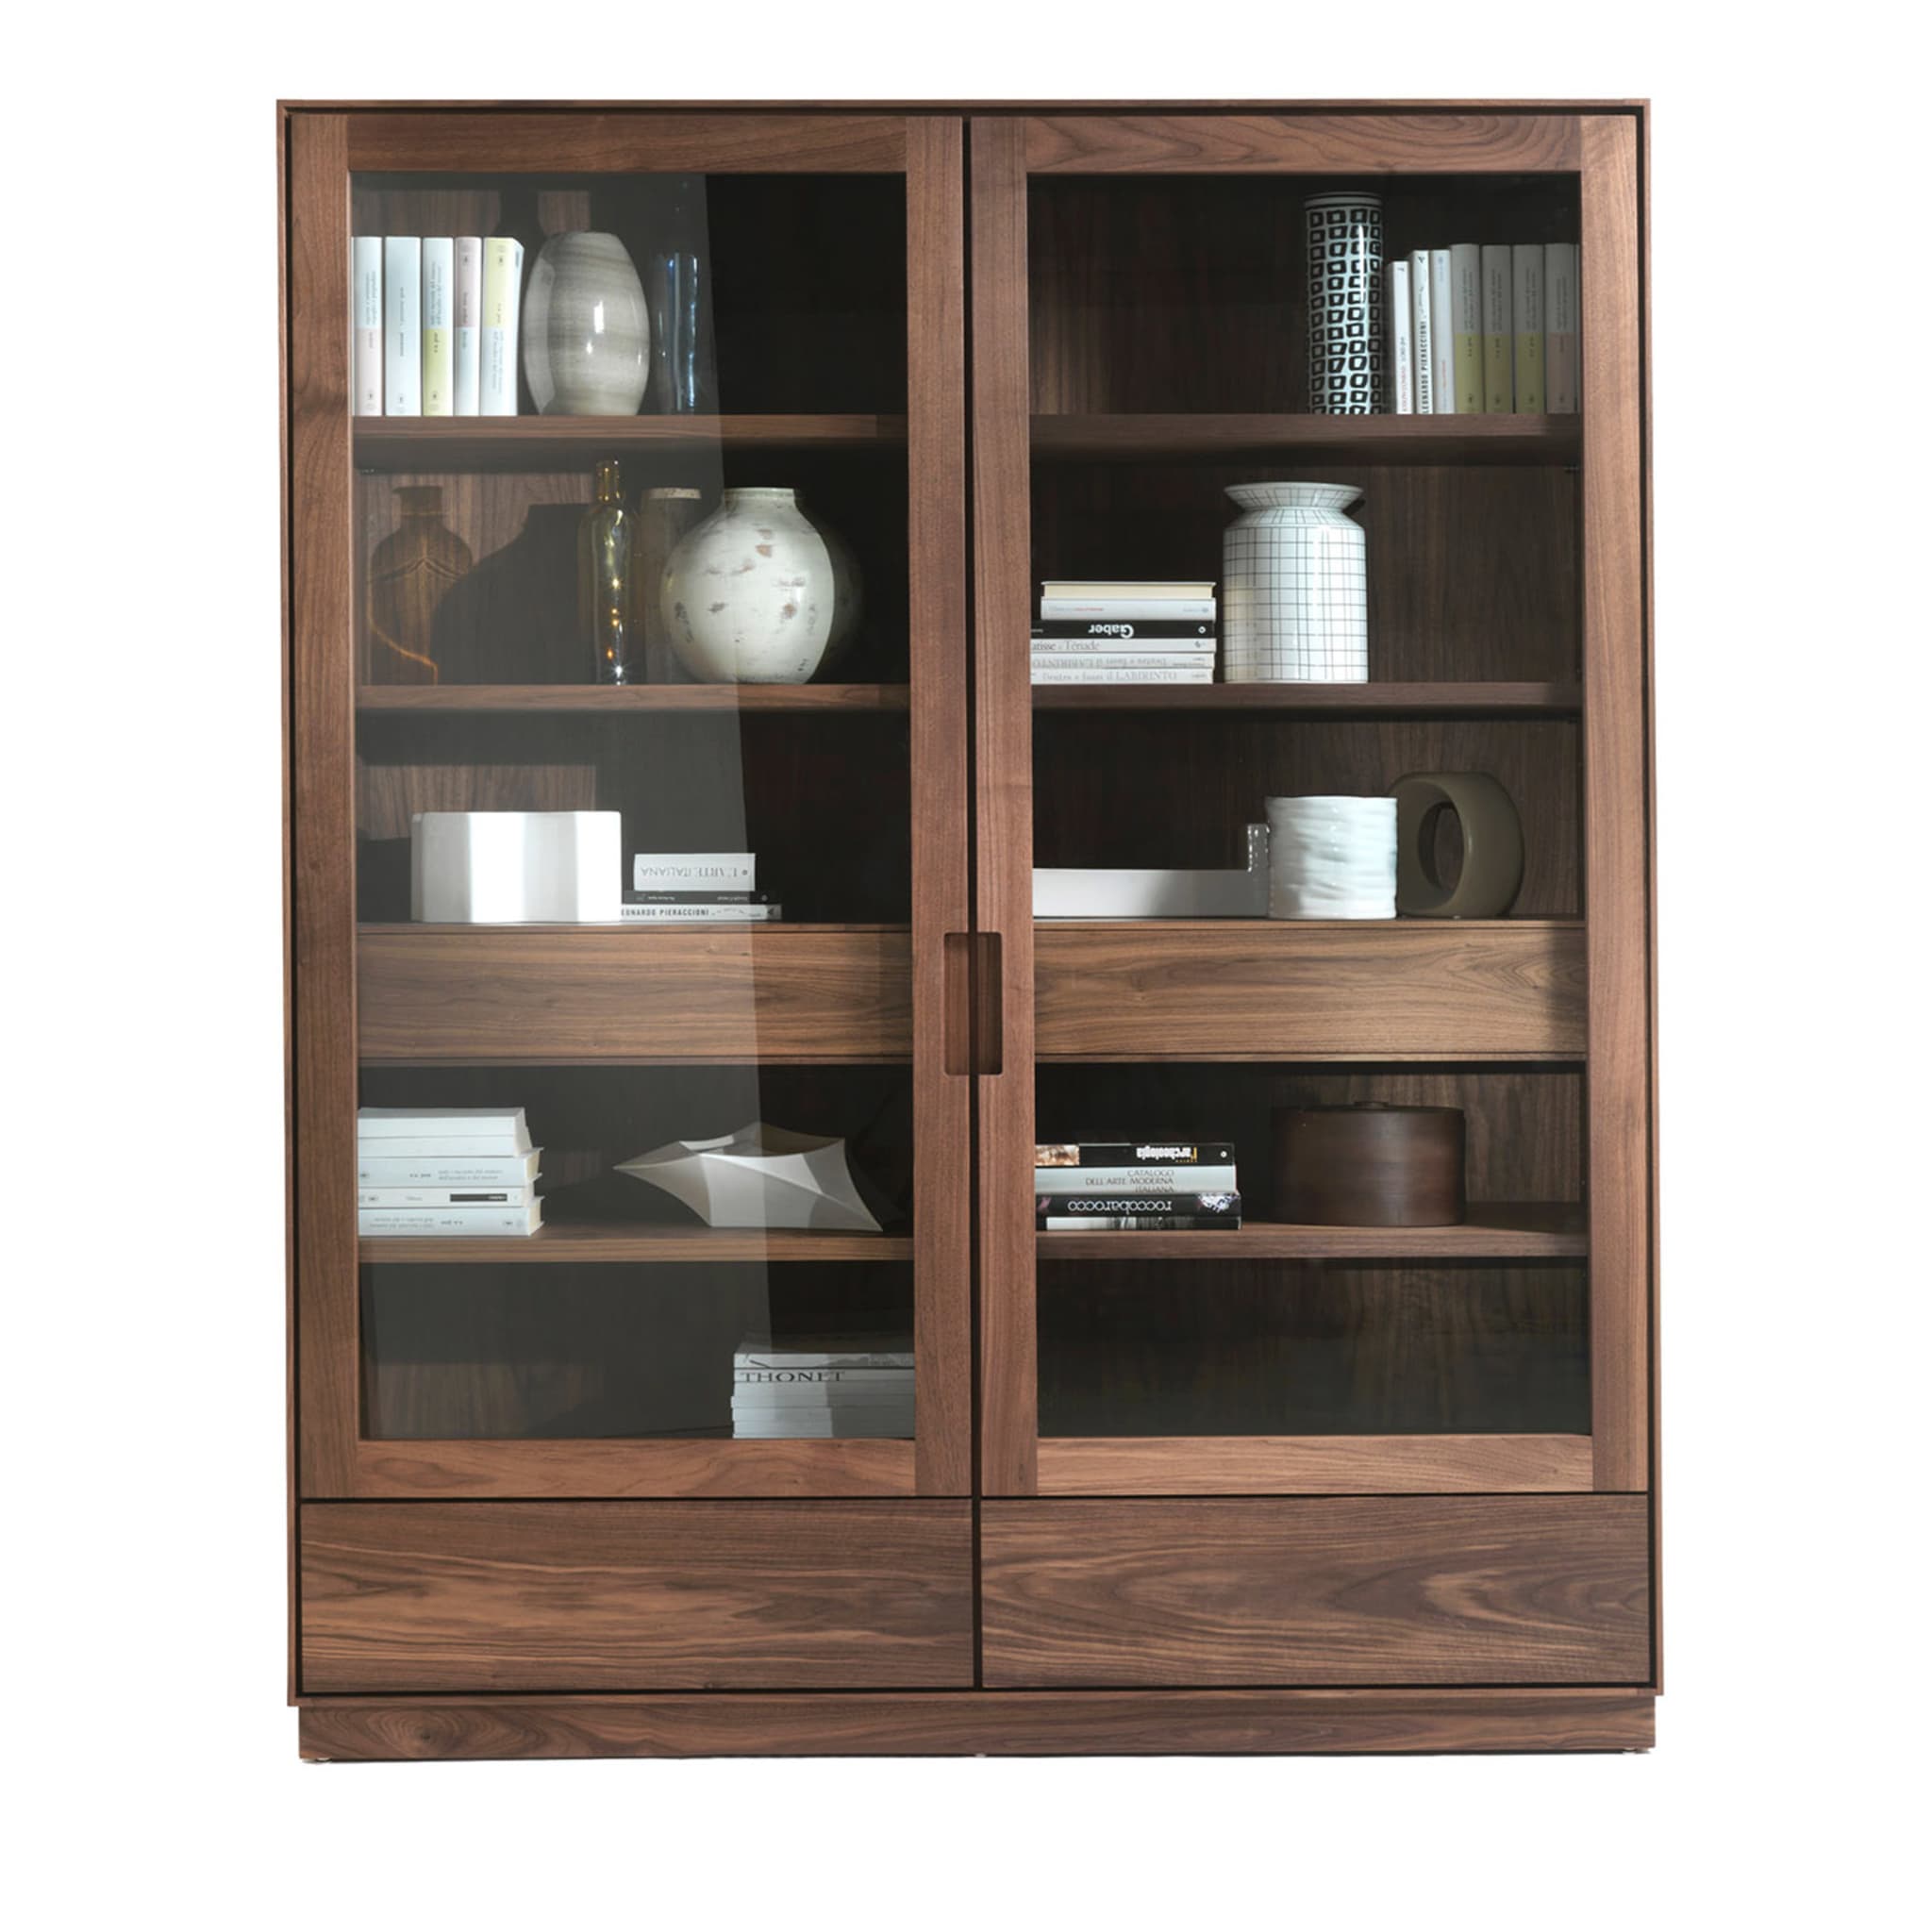 Colonia 2013 2-Door Walnut Cabinet by C.R. & S. Riva 1920 - Main view